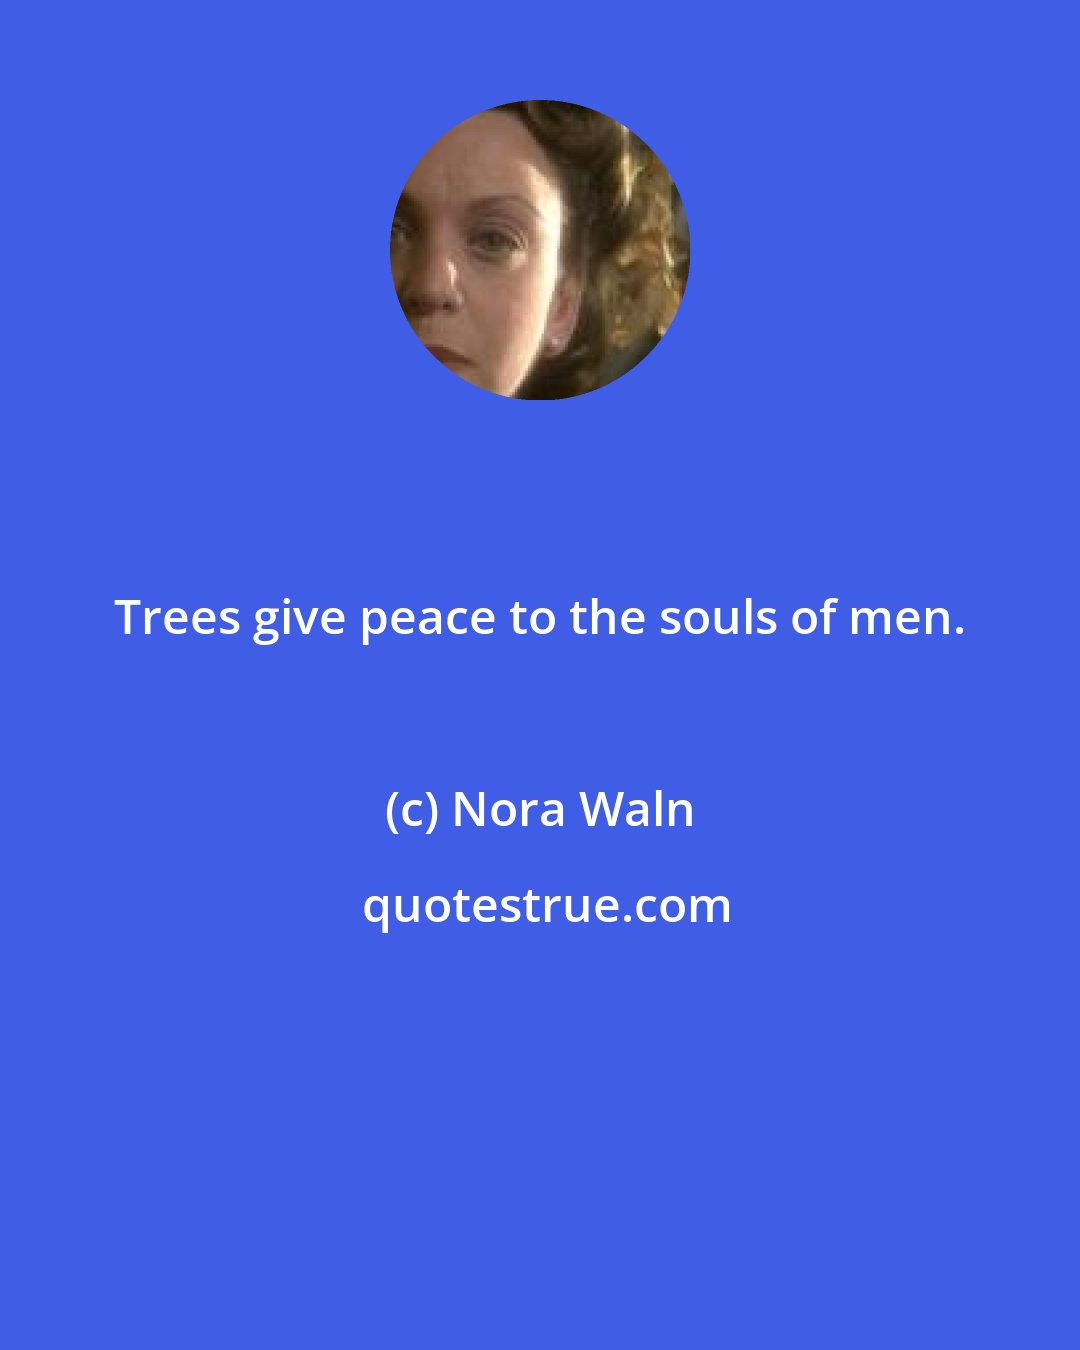 Nora Waln: Trees give peace to the souls of men.